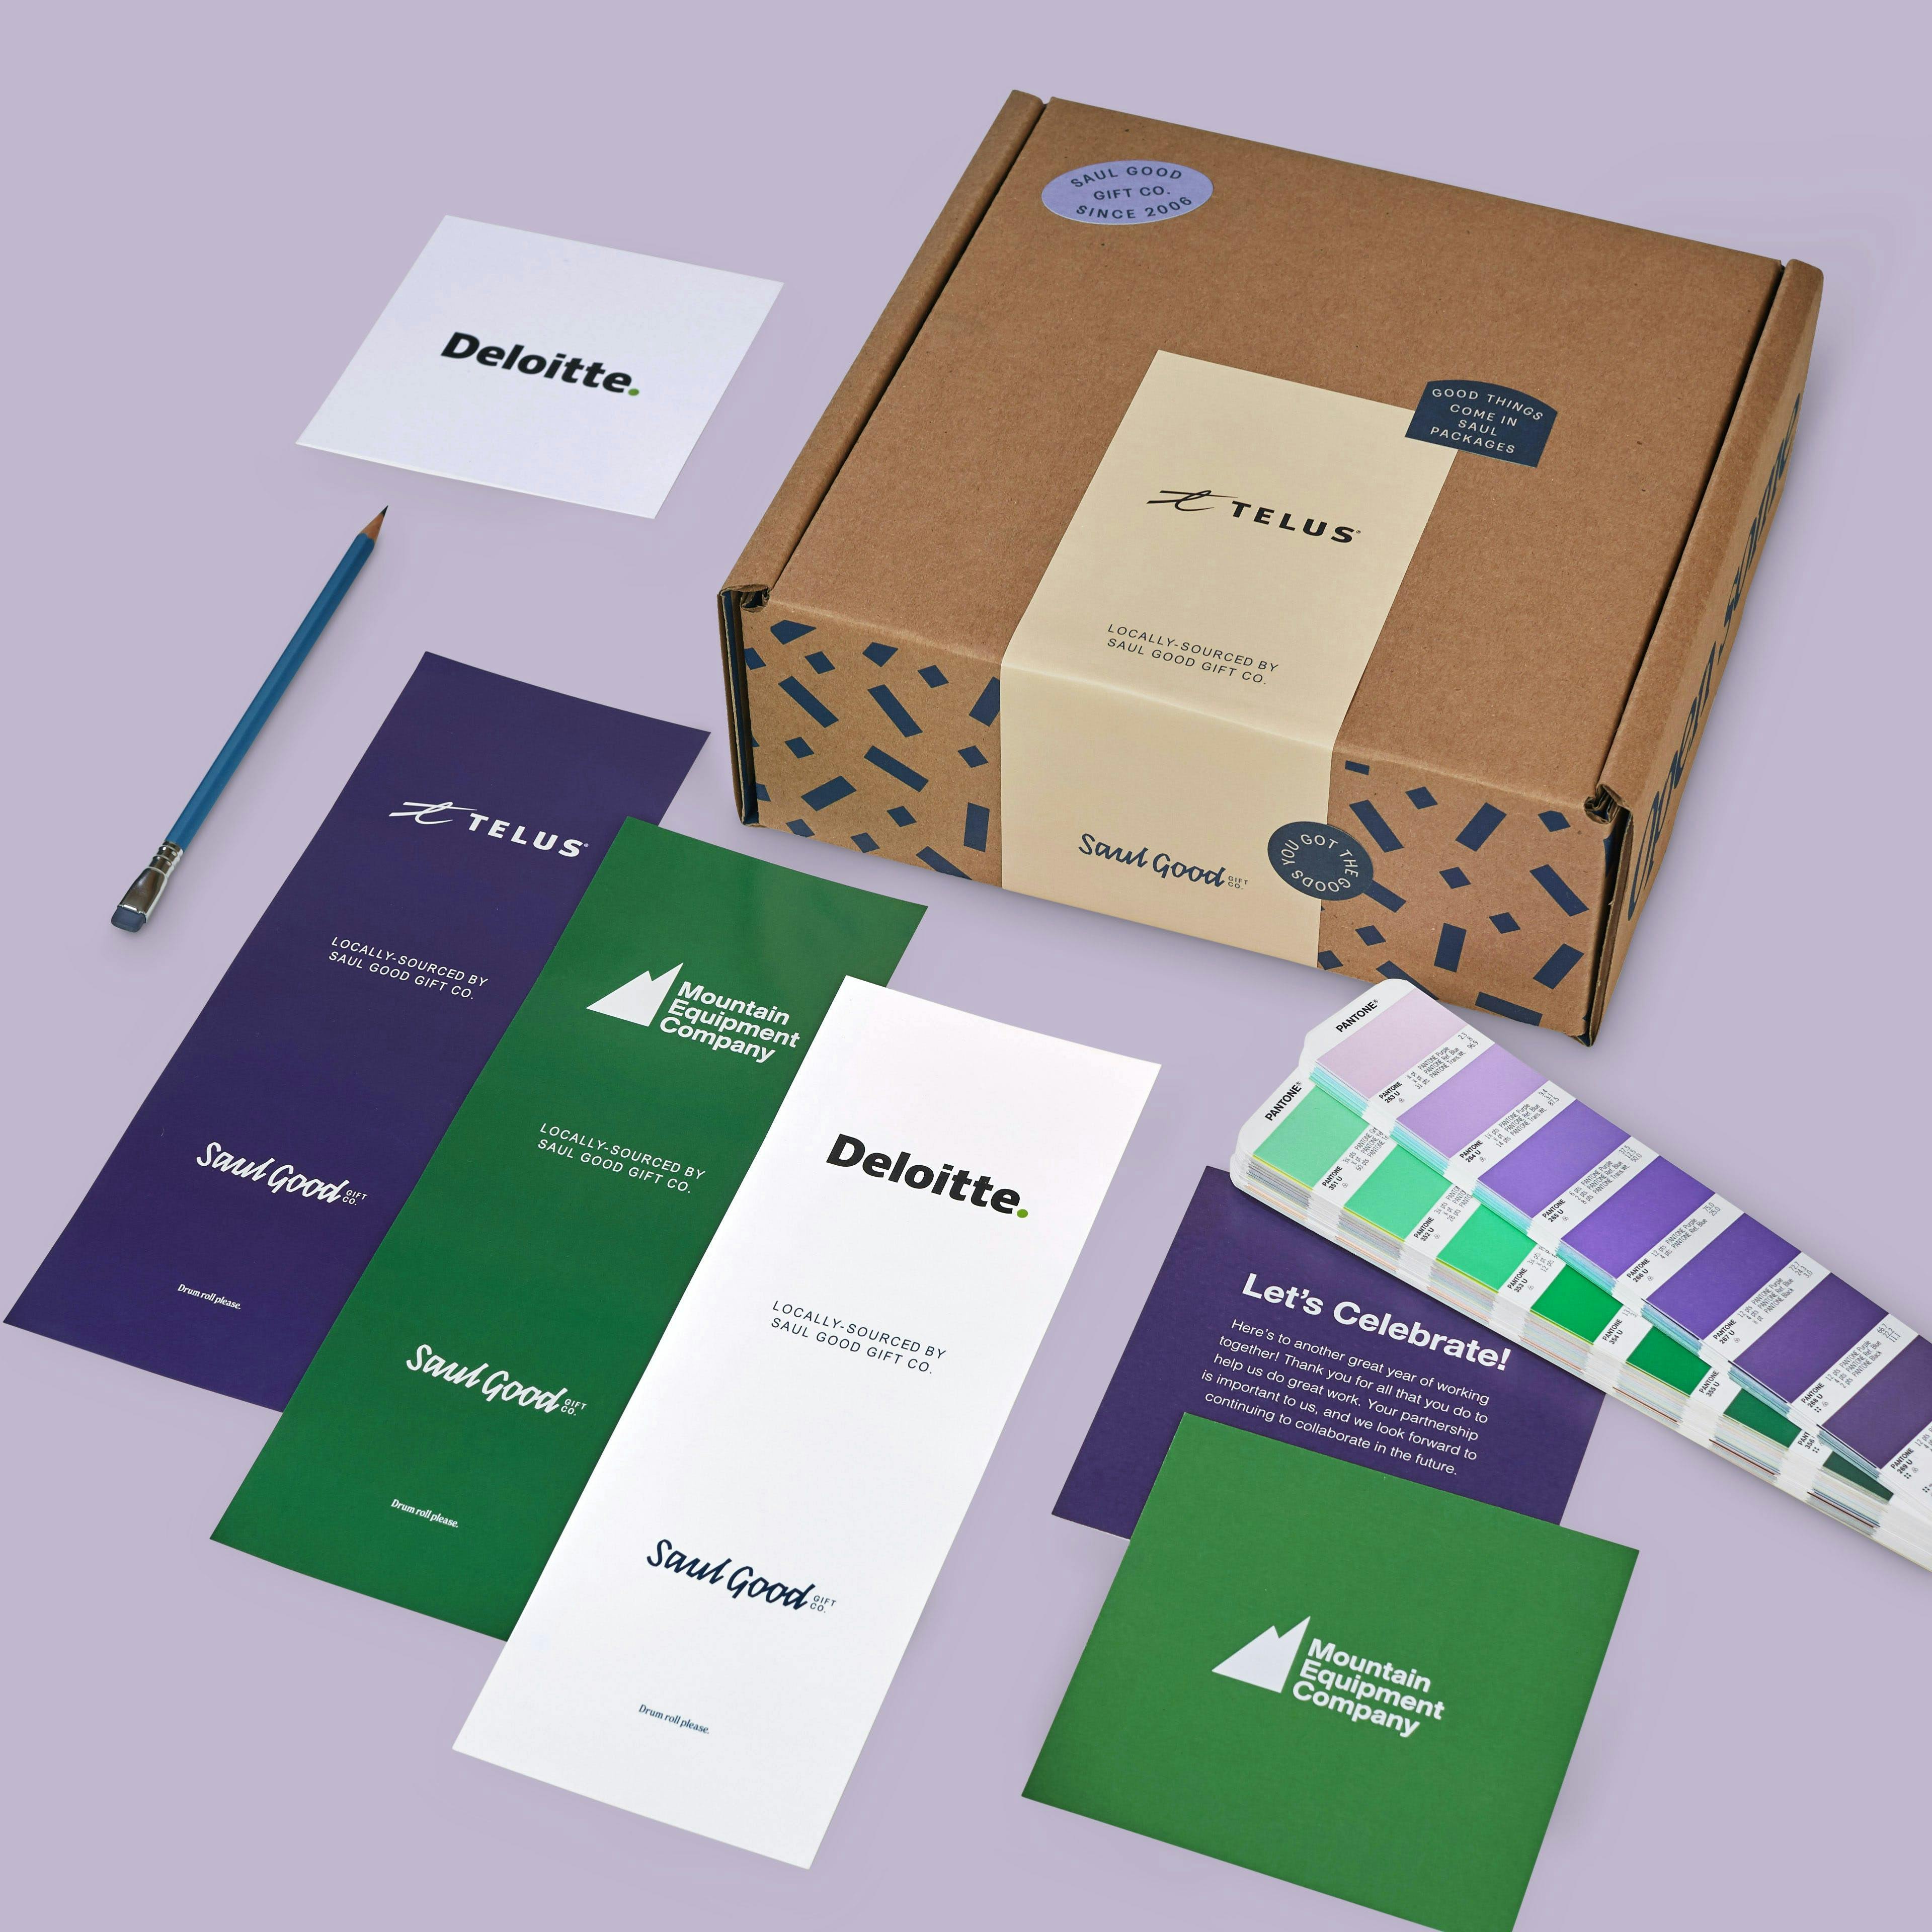 Branded gift boxes and branded greeting cards showing examples from corporate gift programs